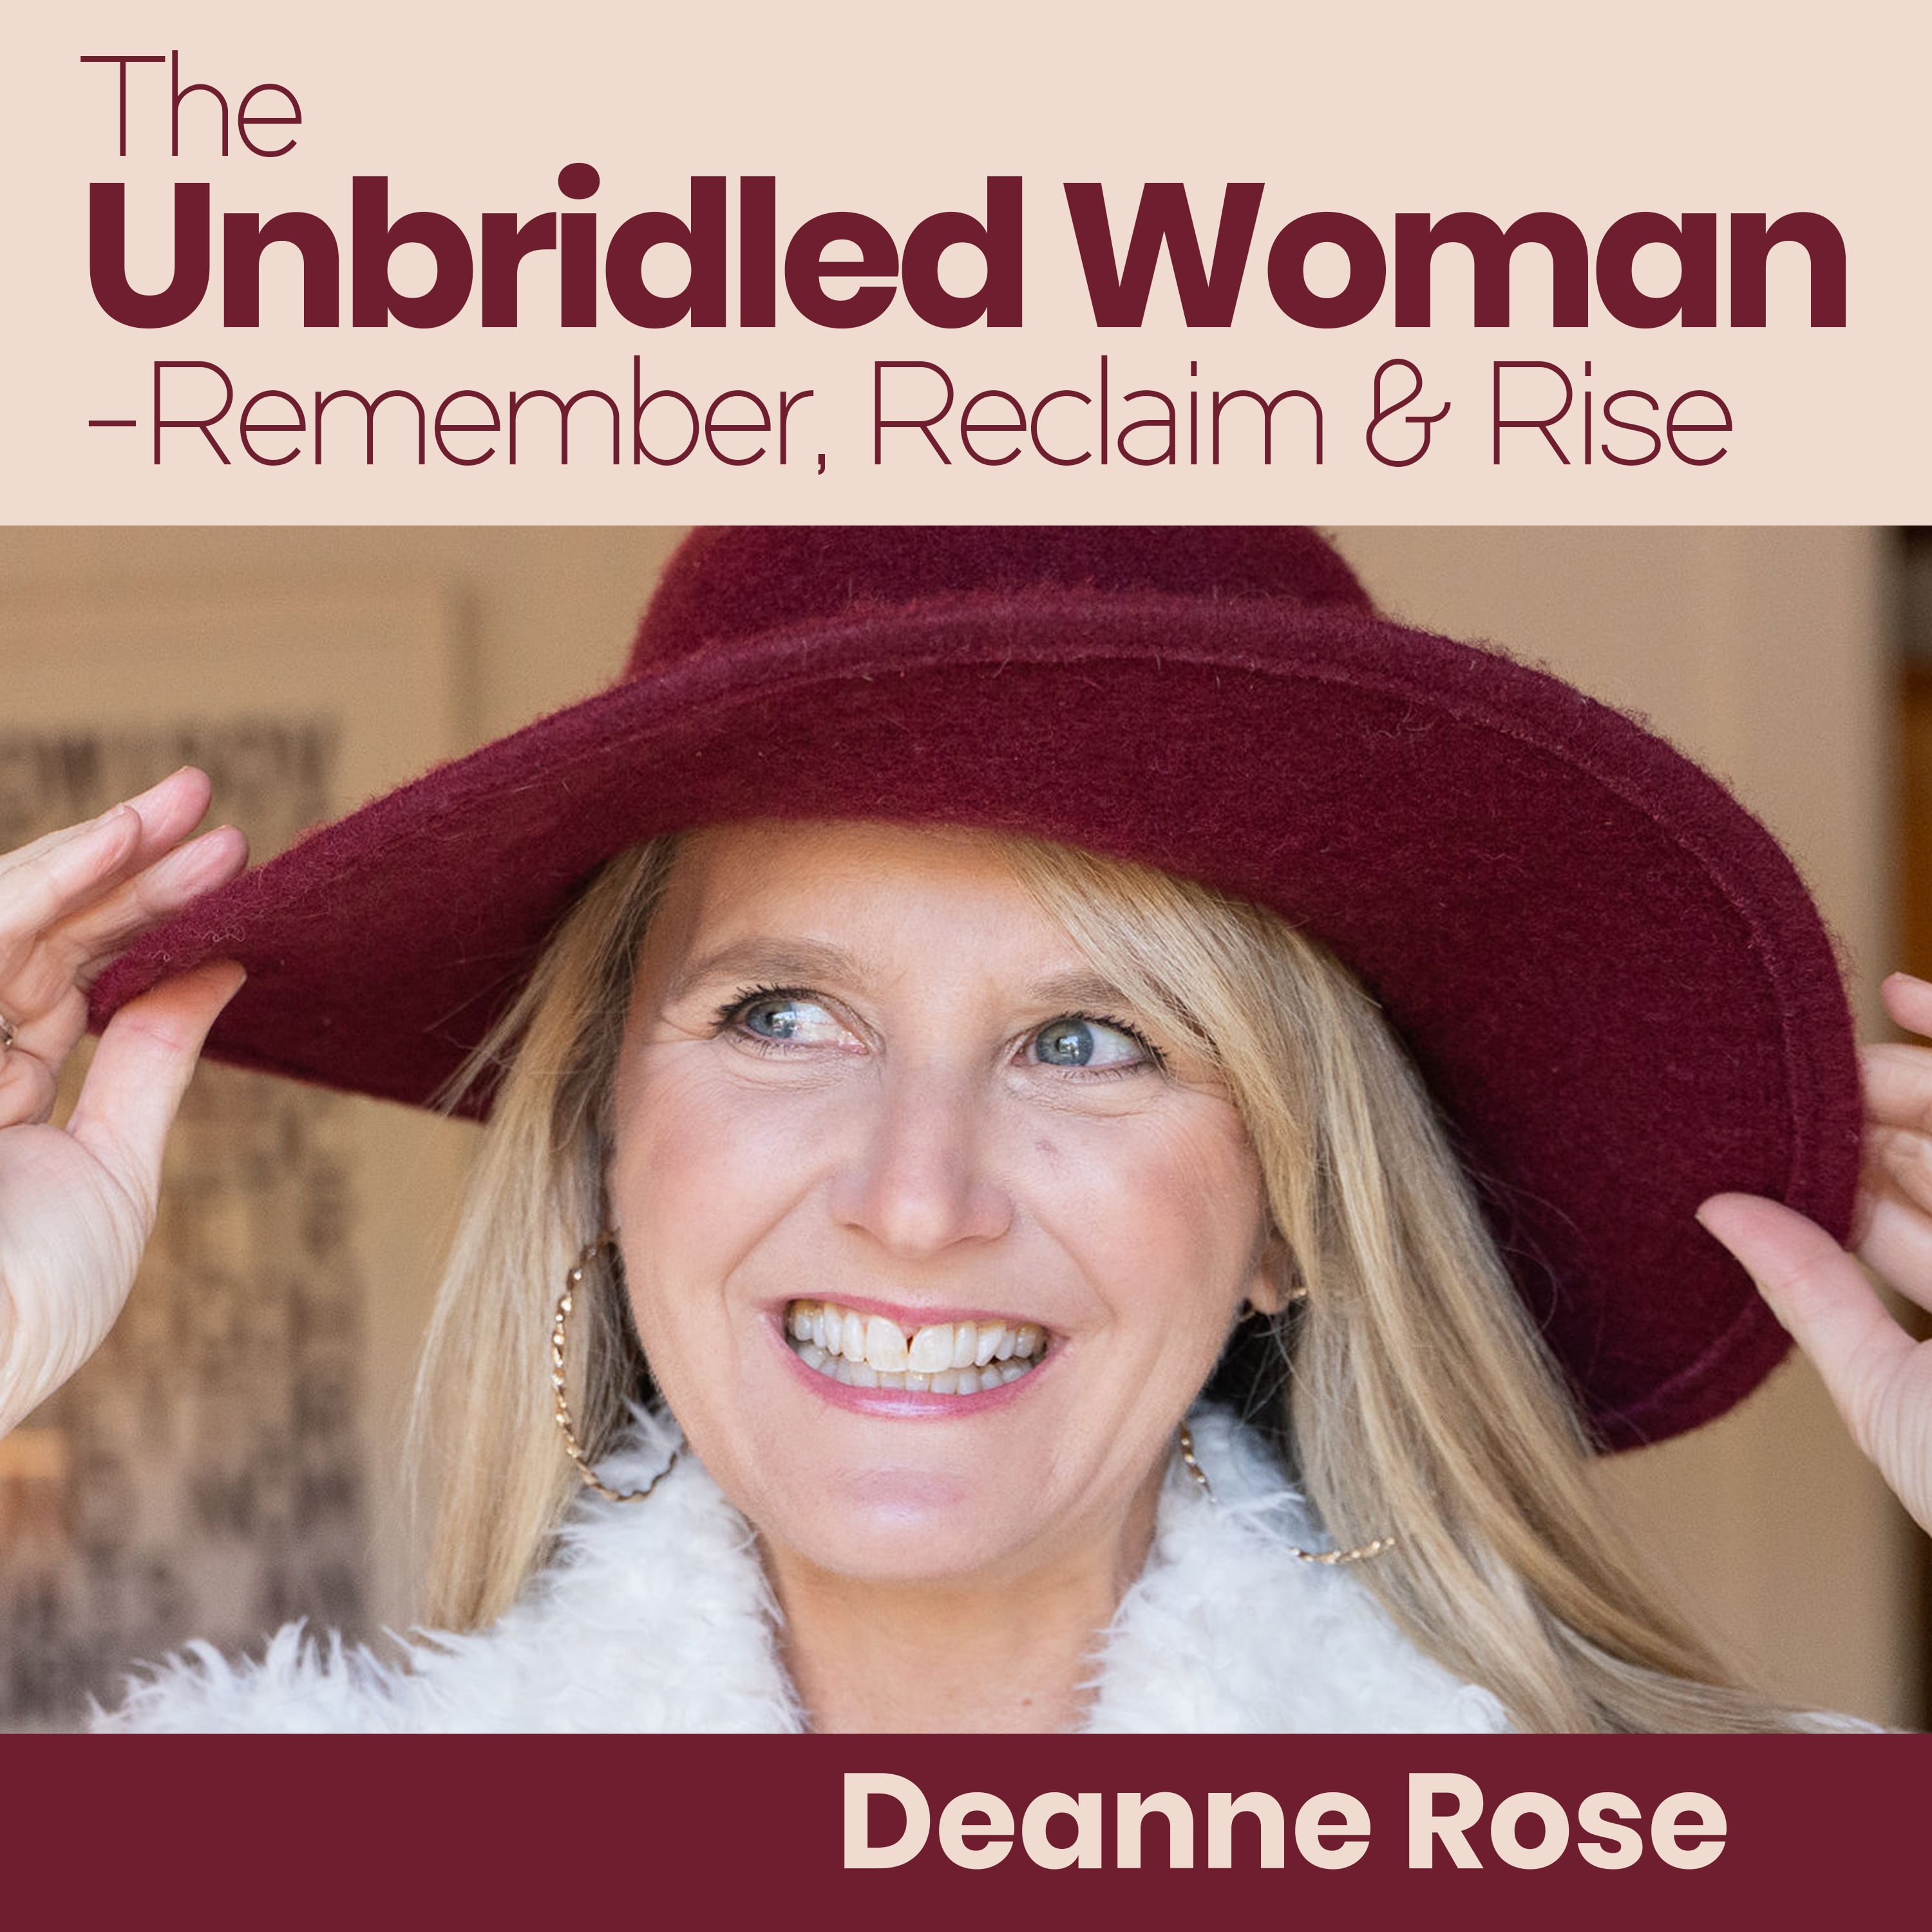 The Unbridled Woman-Remember, Reclaim & Rise